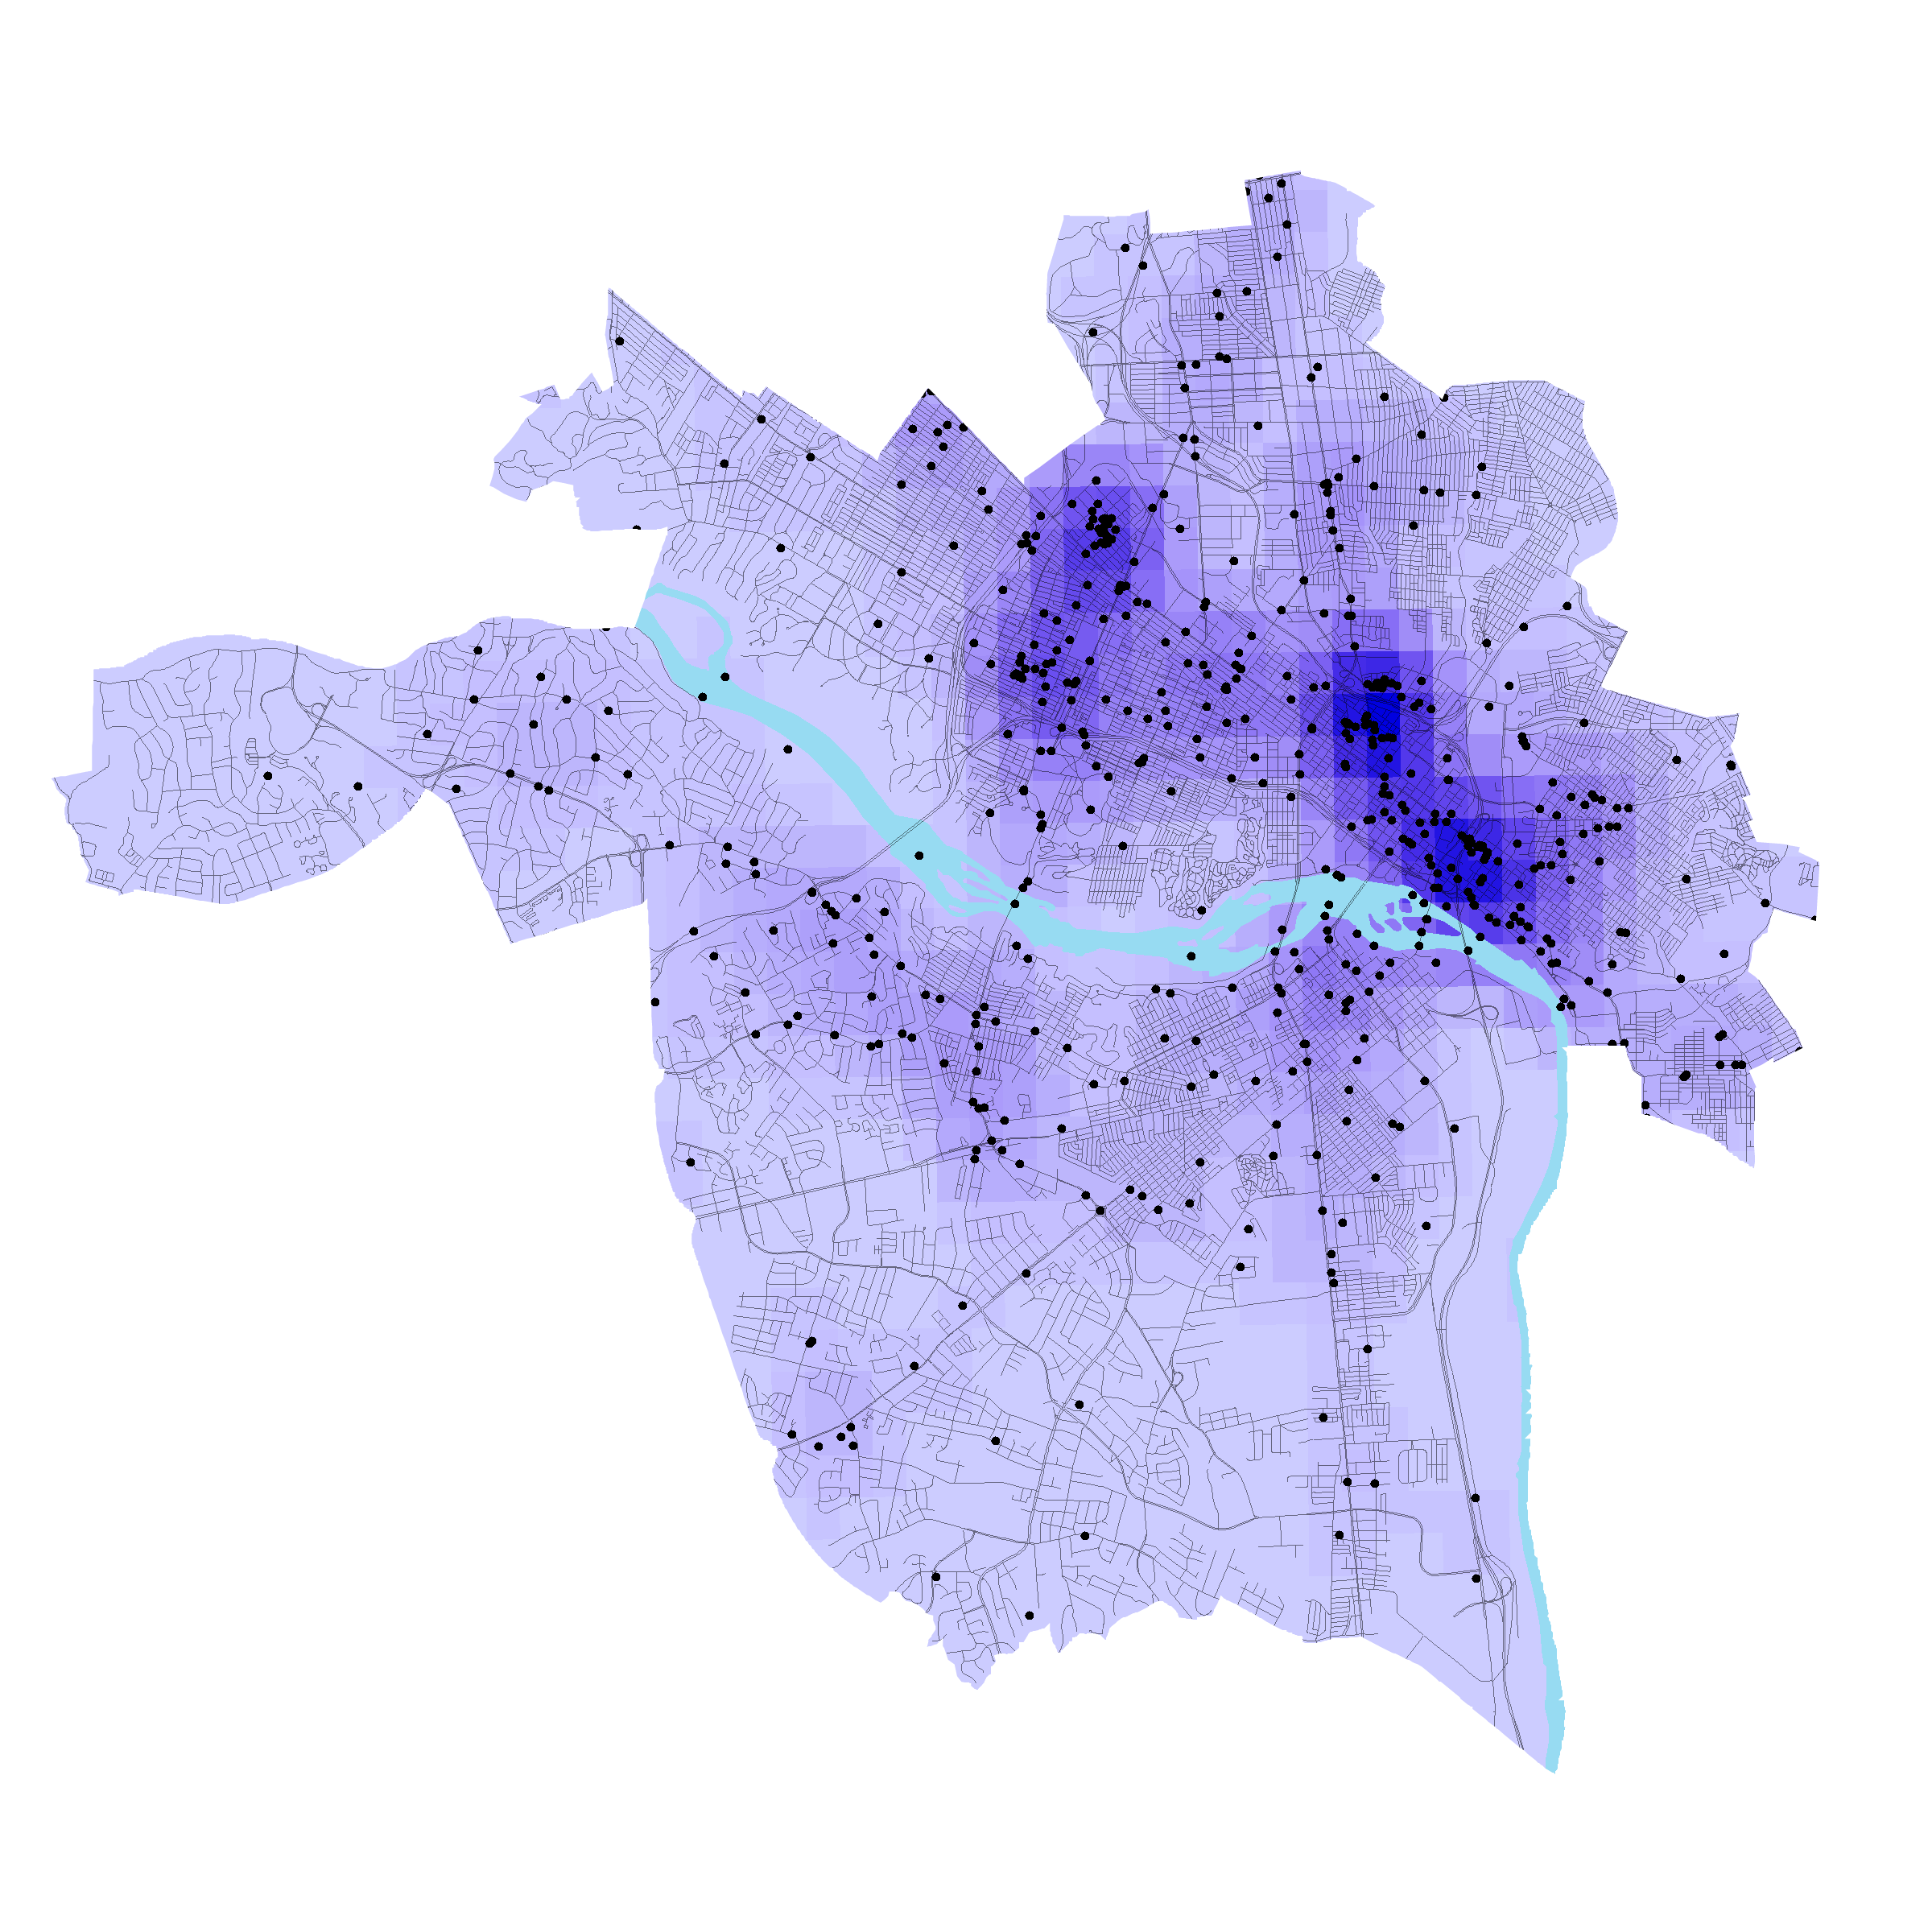 This image contains a map of Richmond in blue with darker blue areas shaded for where survey respondents noted pedestrian barriers. 